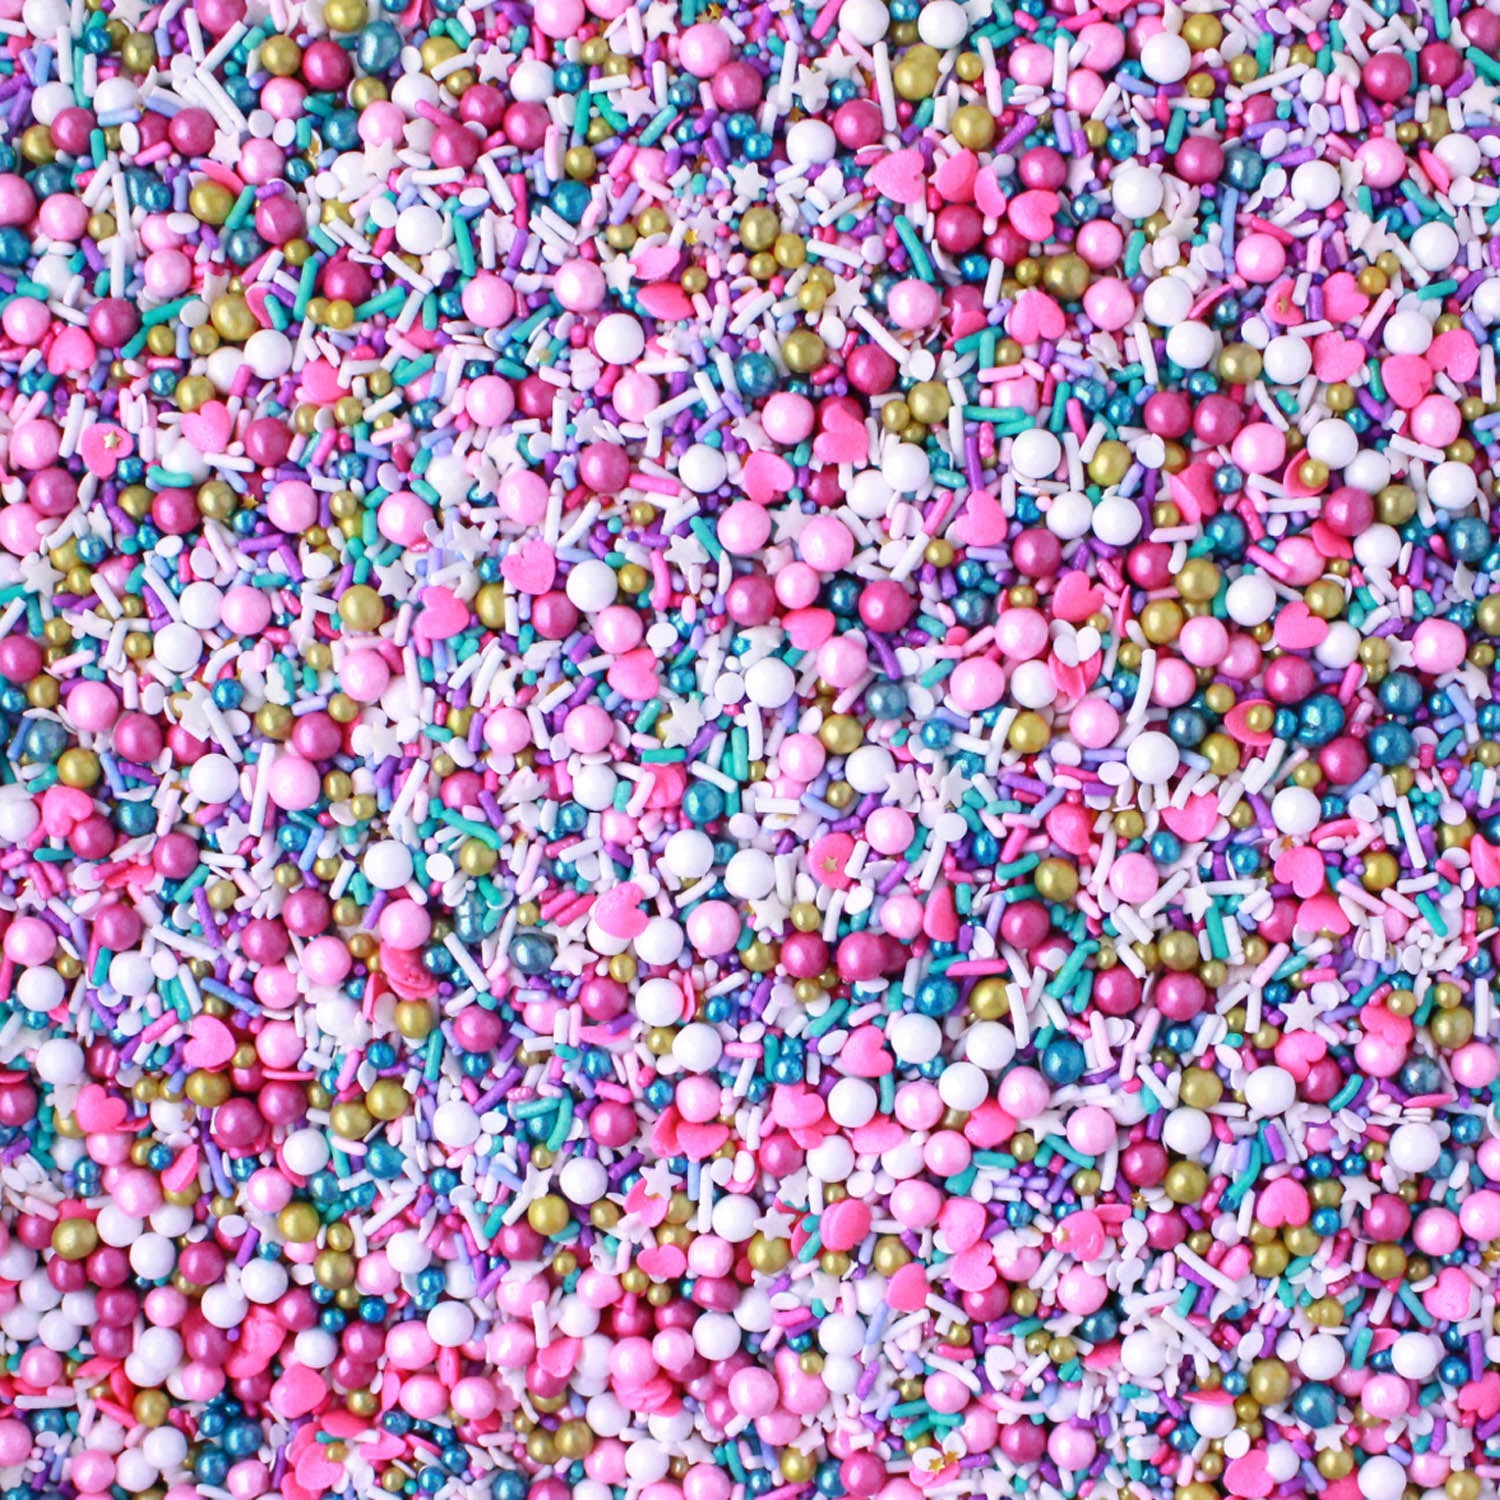 Sprinkle mix with light and dark pink, gold, blue, and white spheres and rods. Same colors as smaller sprinkle pieces.